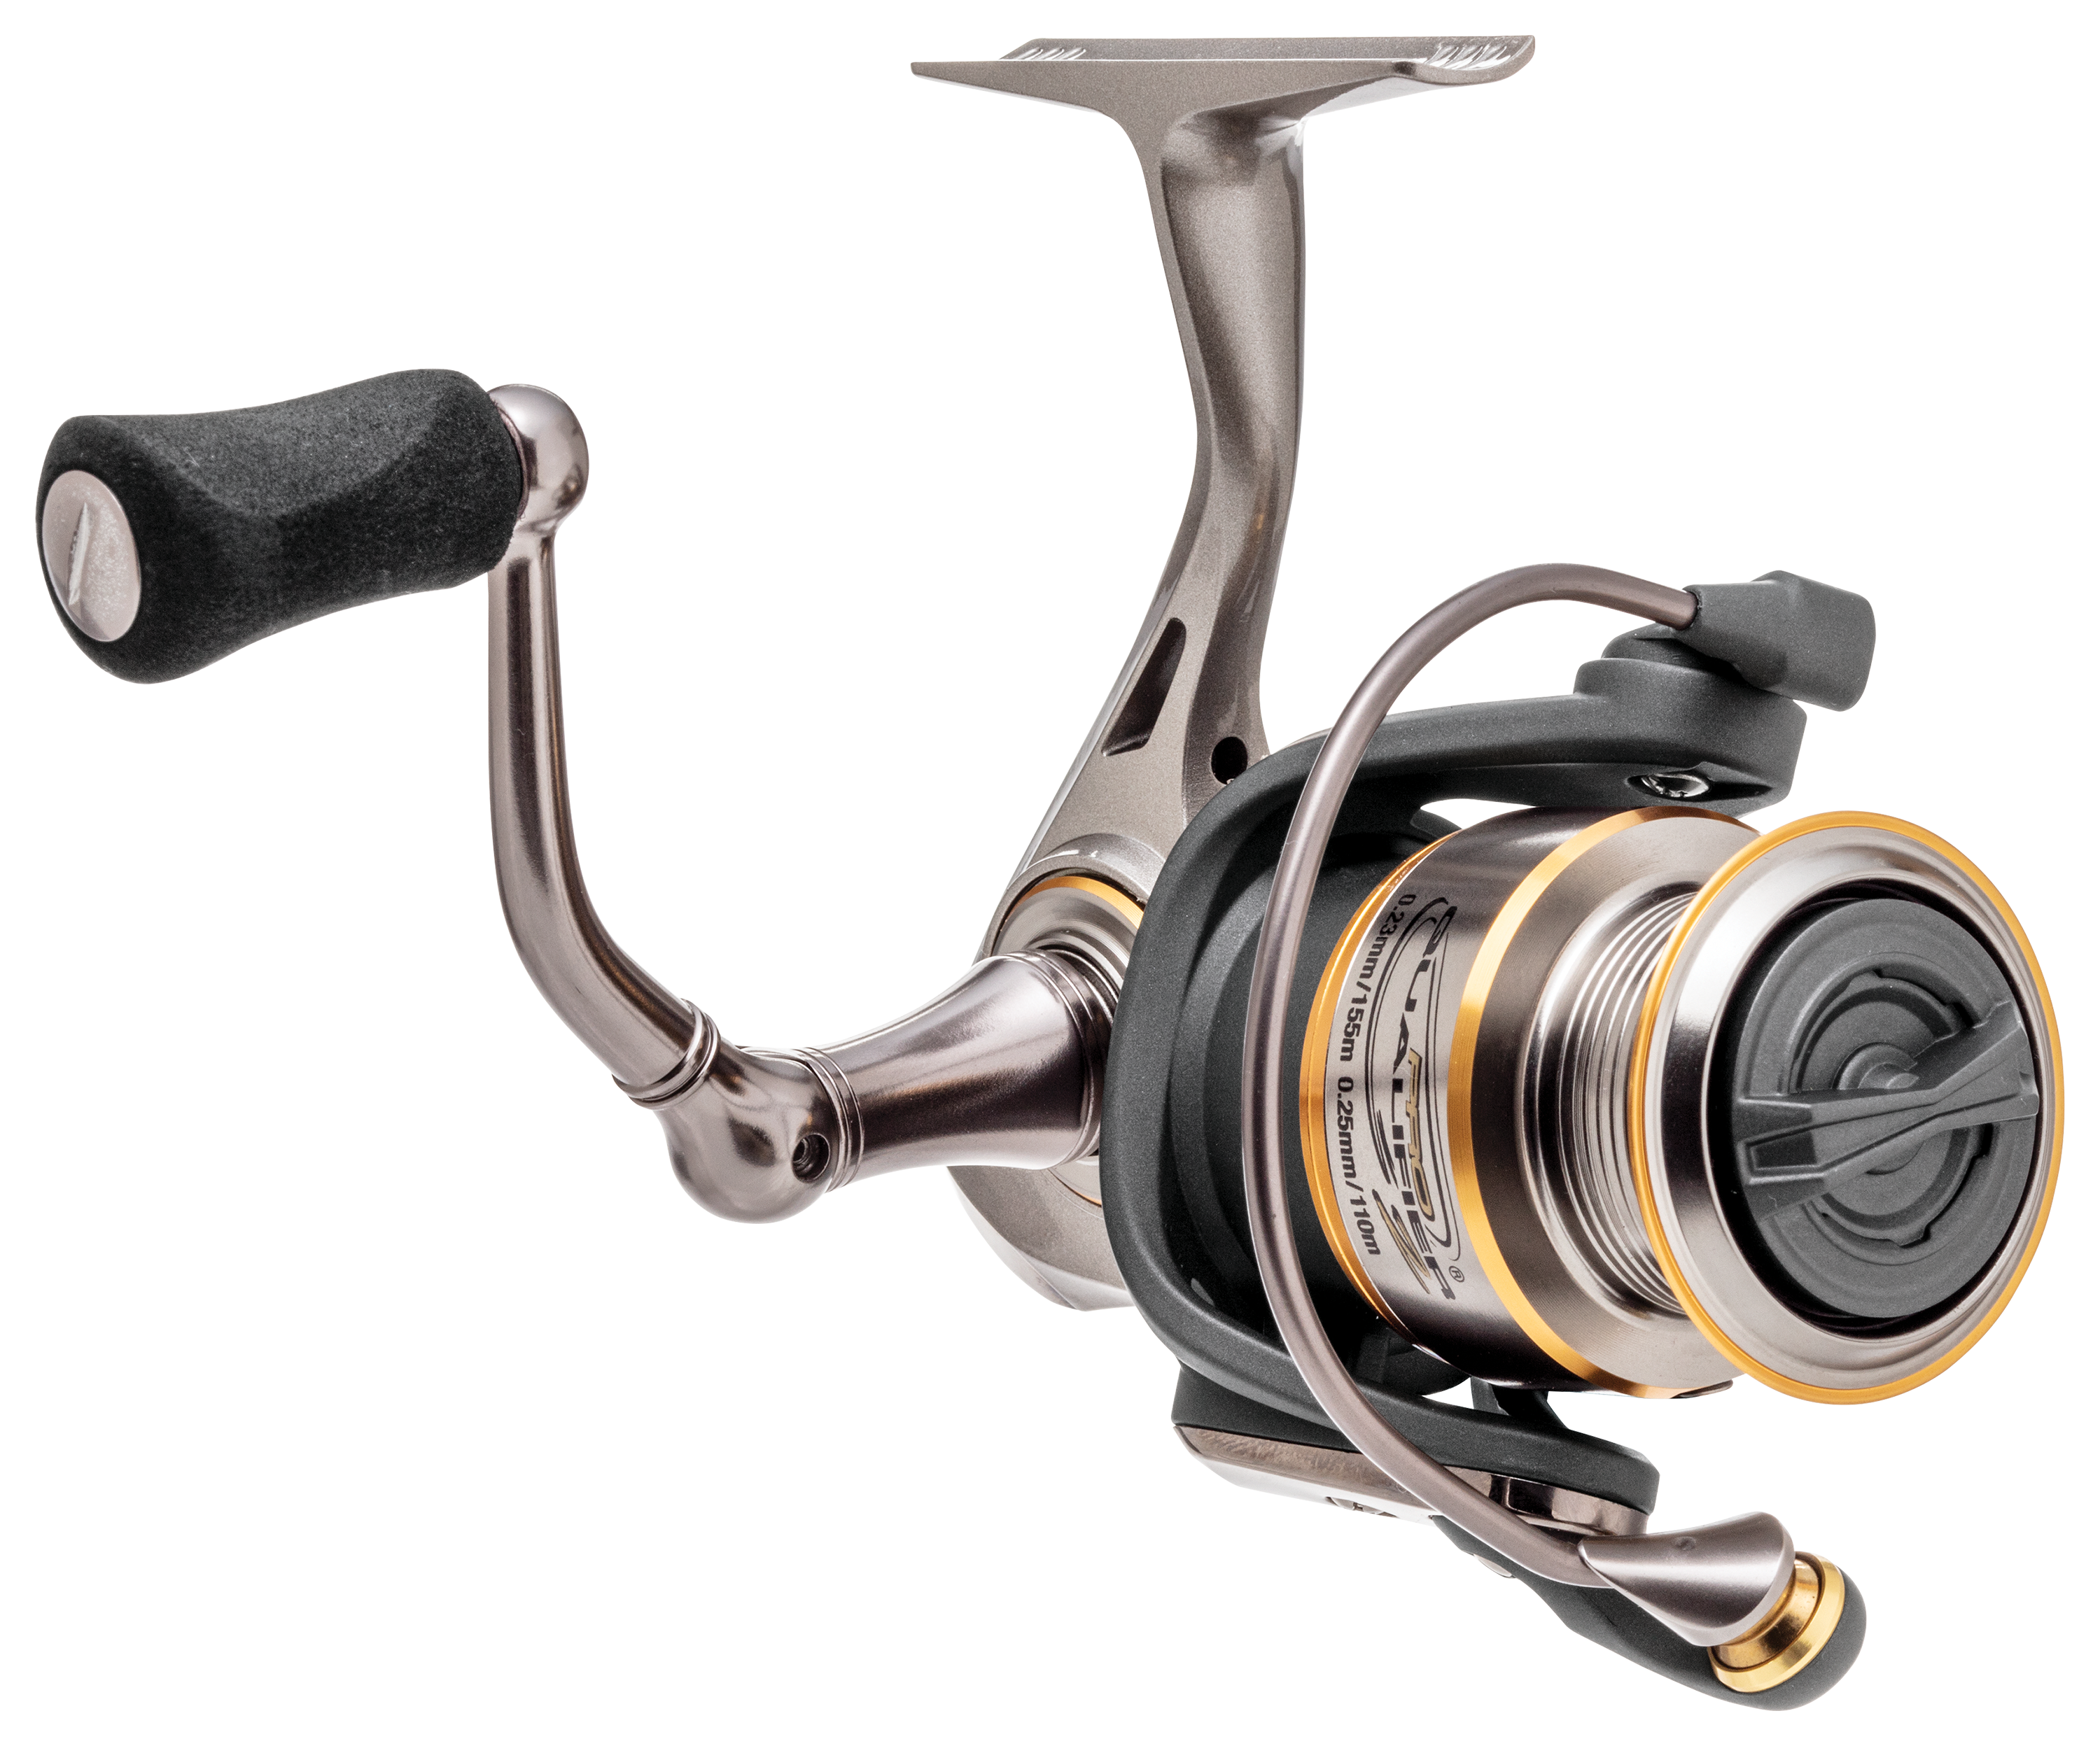 Bass Pro Shops Pro Qualifier 2 Spinning Reel - PQF4000